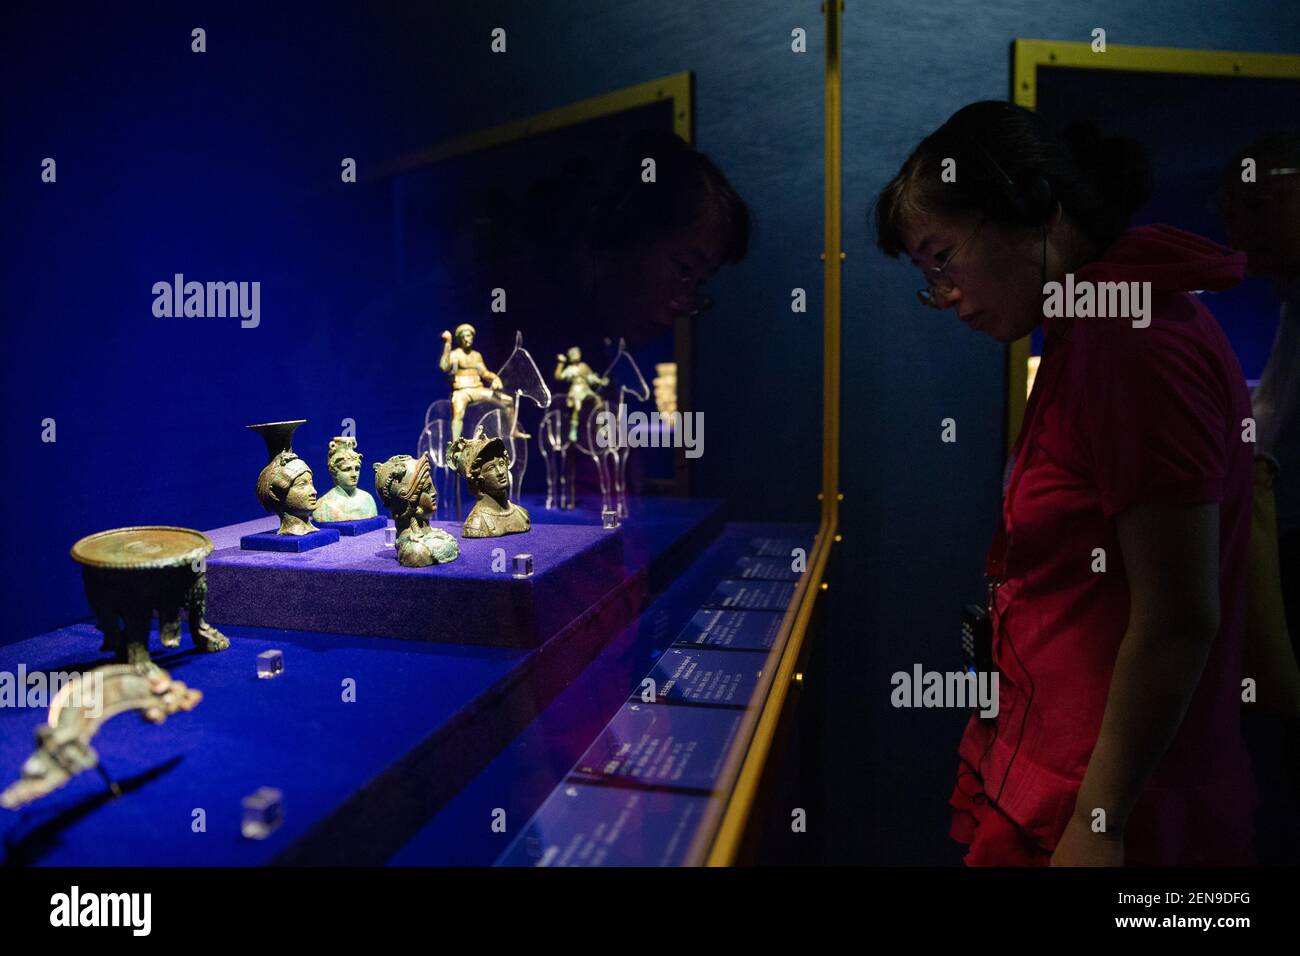 A visitor views treasures and relics from Afghan national treasures during an exhibition at a museum in Nanjing city, east China's Jiangsu province, 8 July 2019. An exhibition displayed a total of 231 pieces of the national treasures and relics from Afghan national treasures. China is holding a rich variety of exhibitions and activities on the culture of Asian countries and regions as well as exchanges among them. (Photo by Su yang - Imaginechina/Sipa USA) Stock Photo